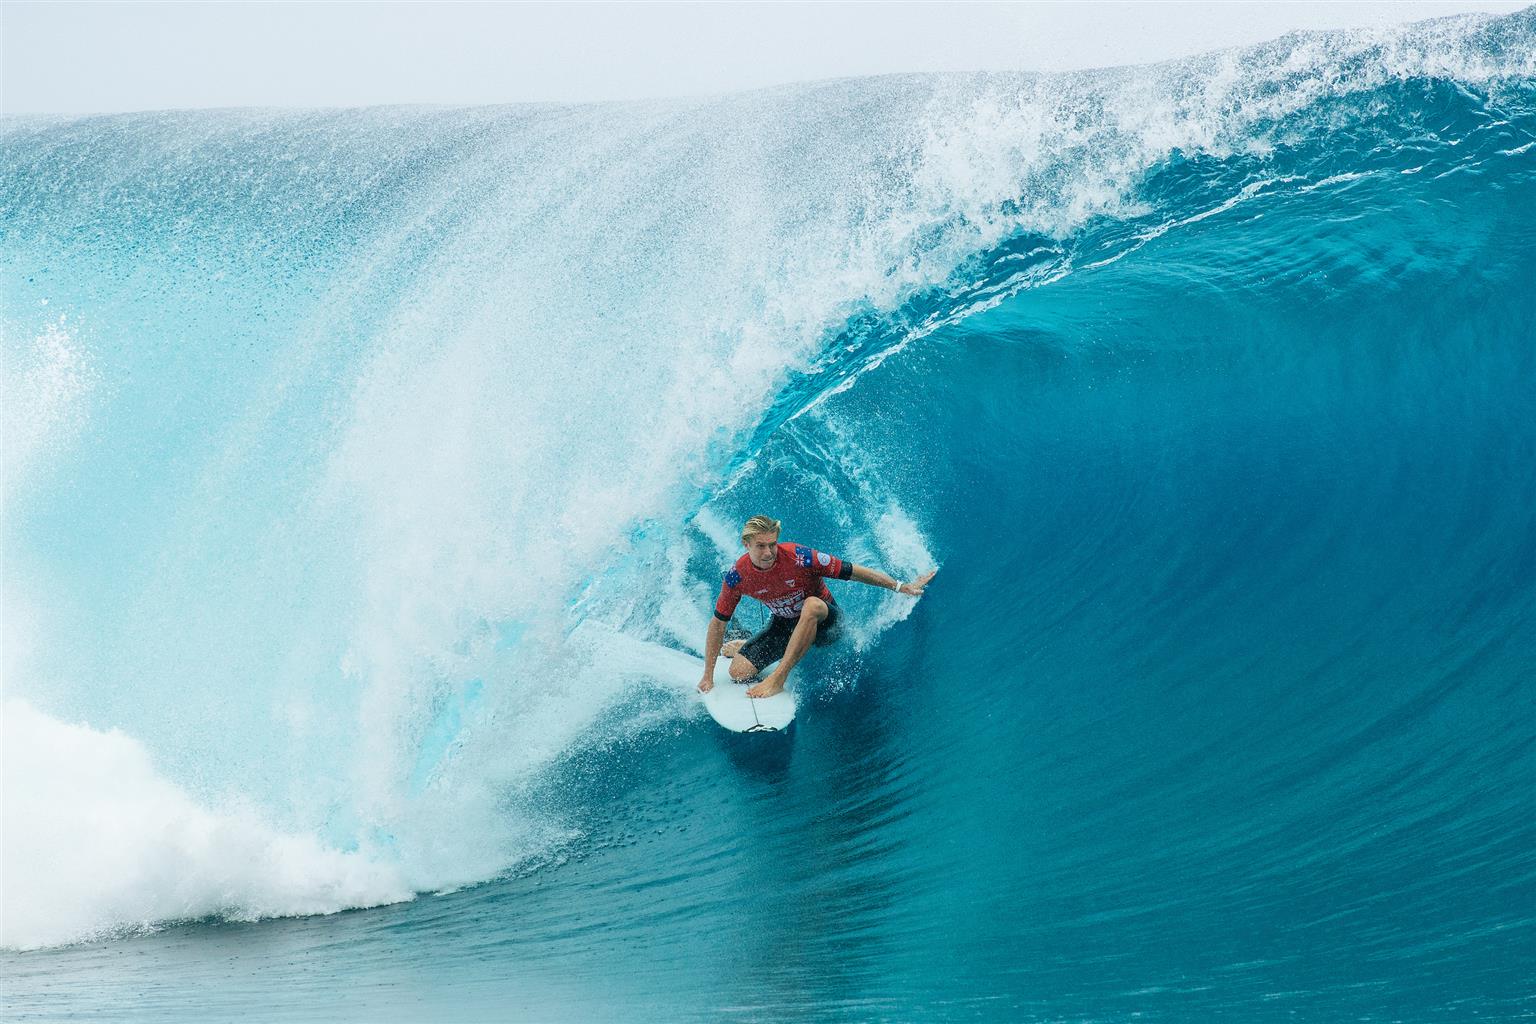 Surfing: Women return to Teahupo'o, Tahiti for first competition in 16 years